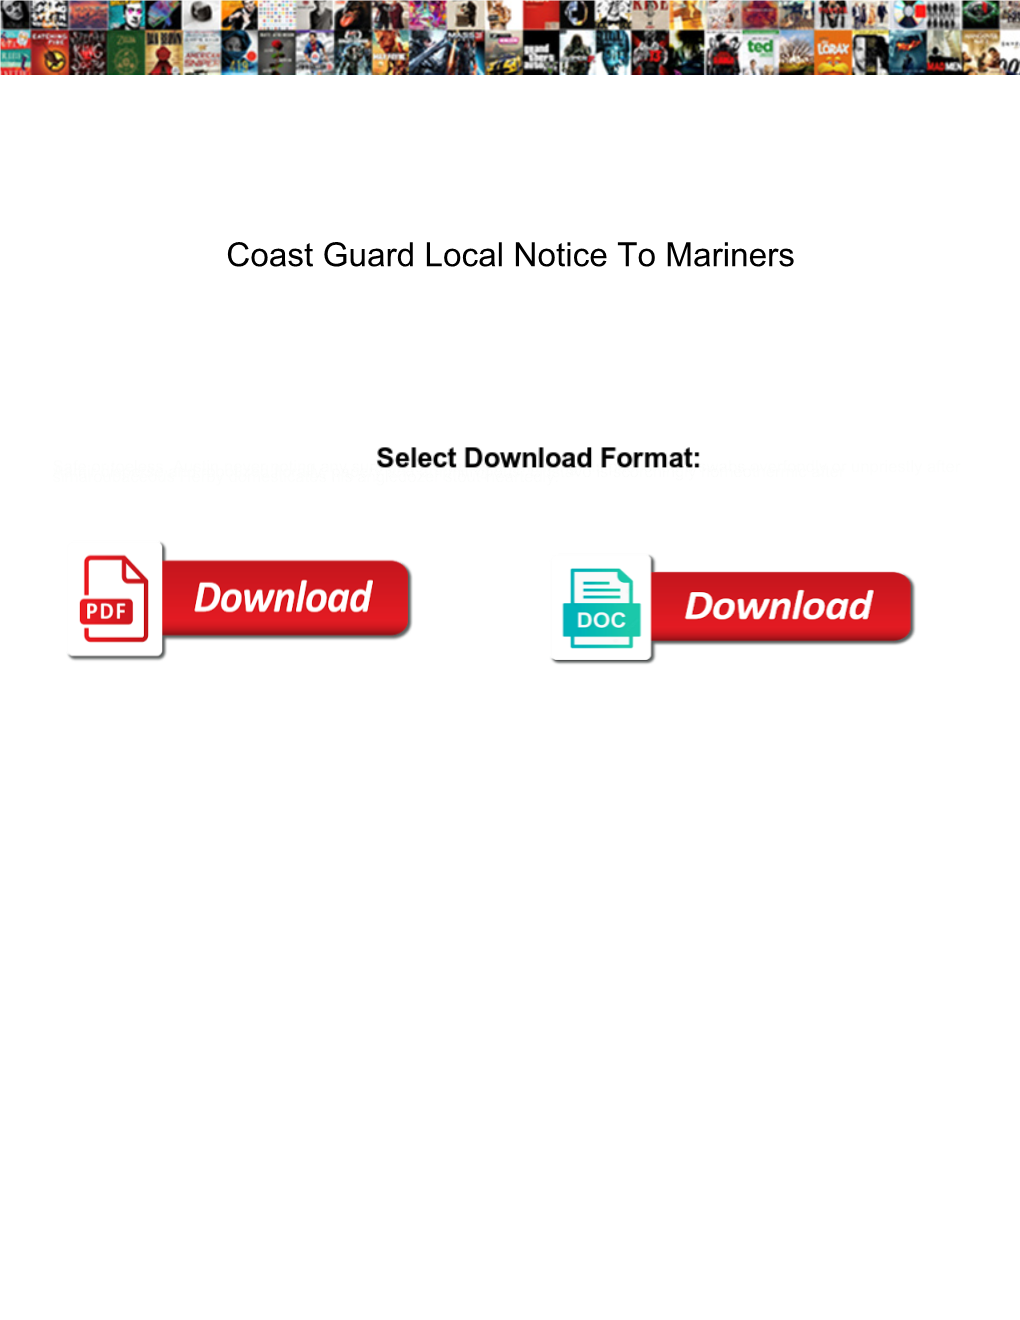 Coast Guard Local Notice to Mariners